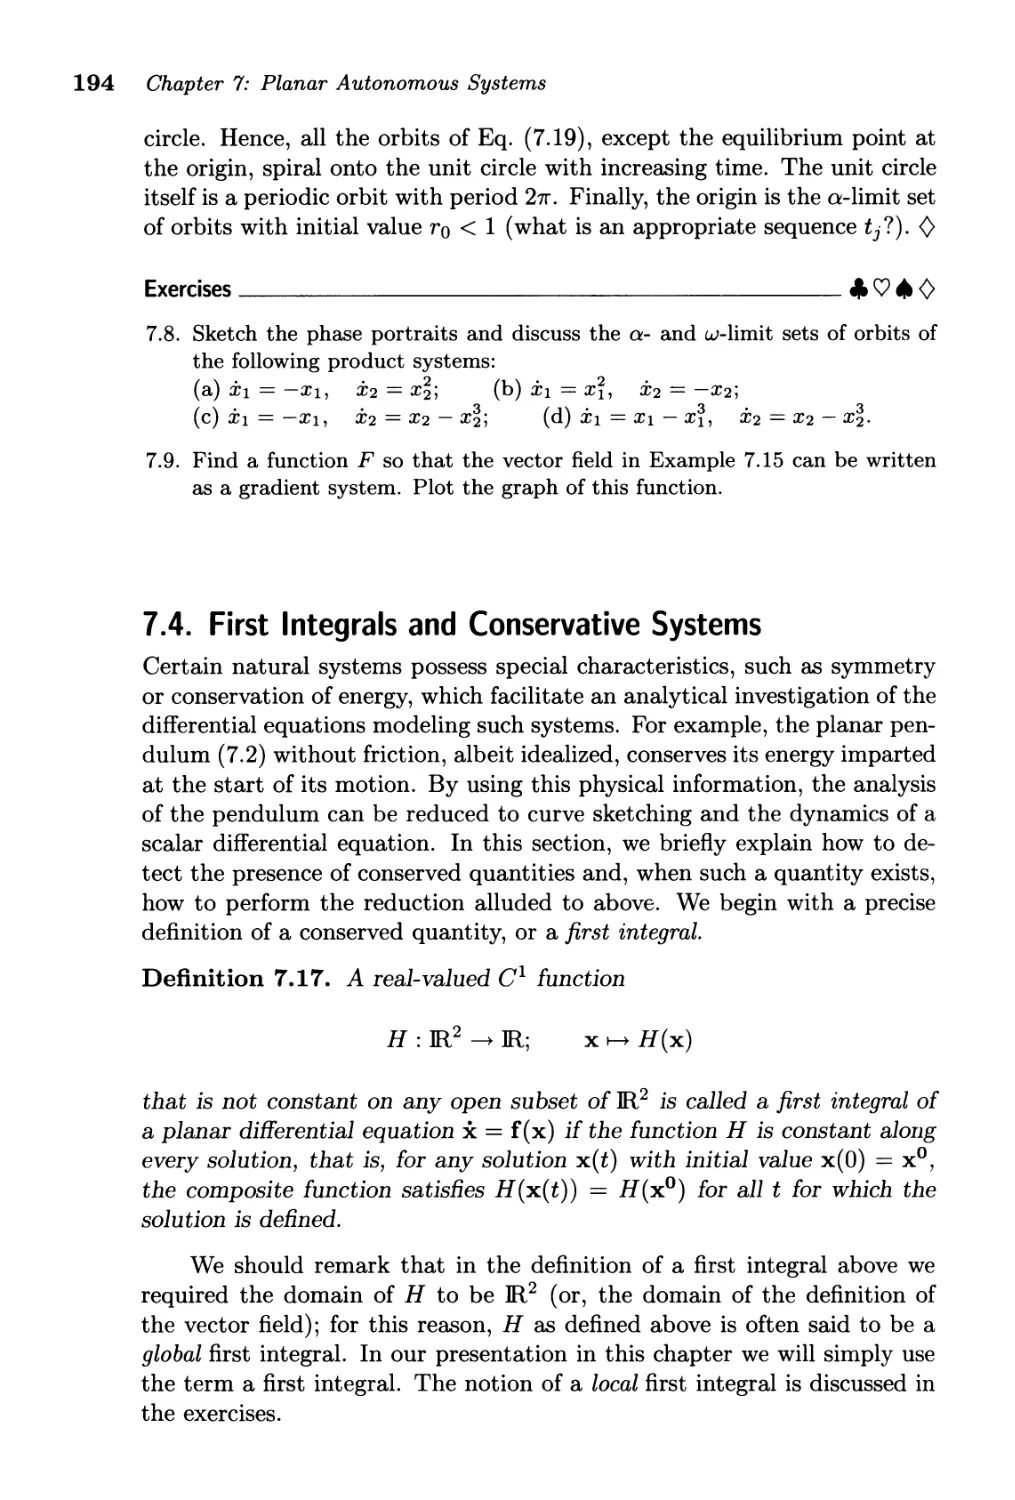 7.4. First Integrals and Conservatjve Systems